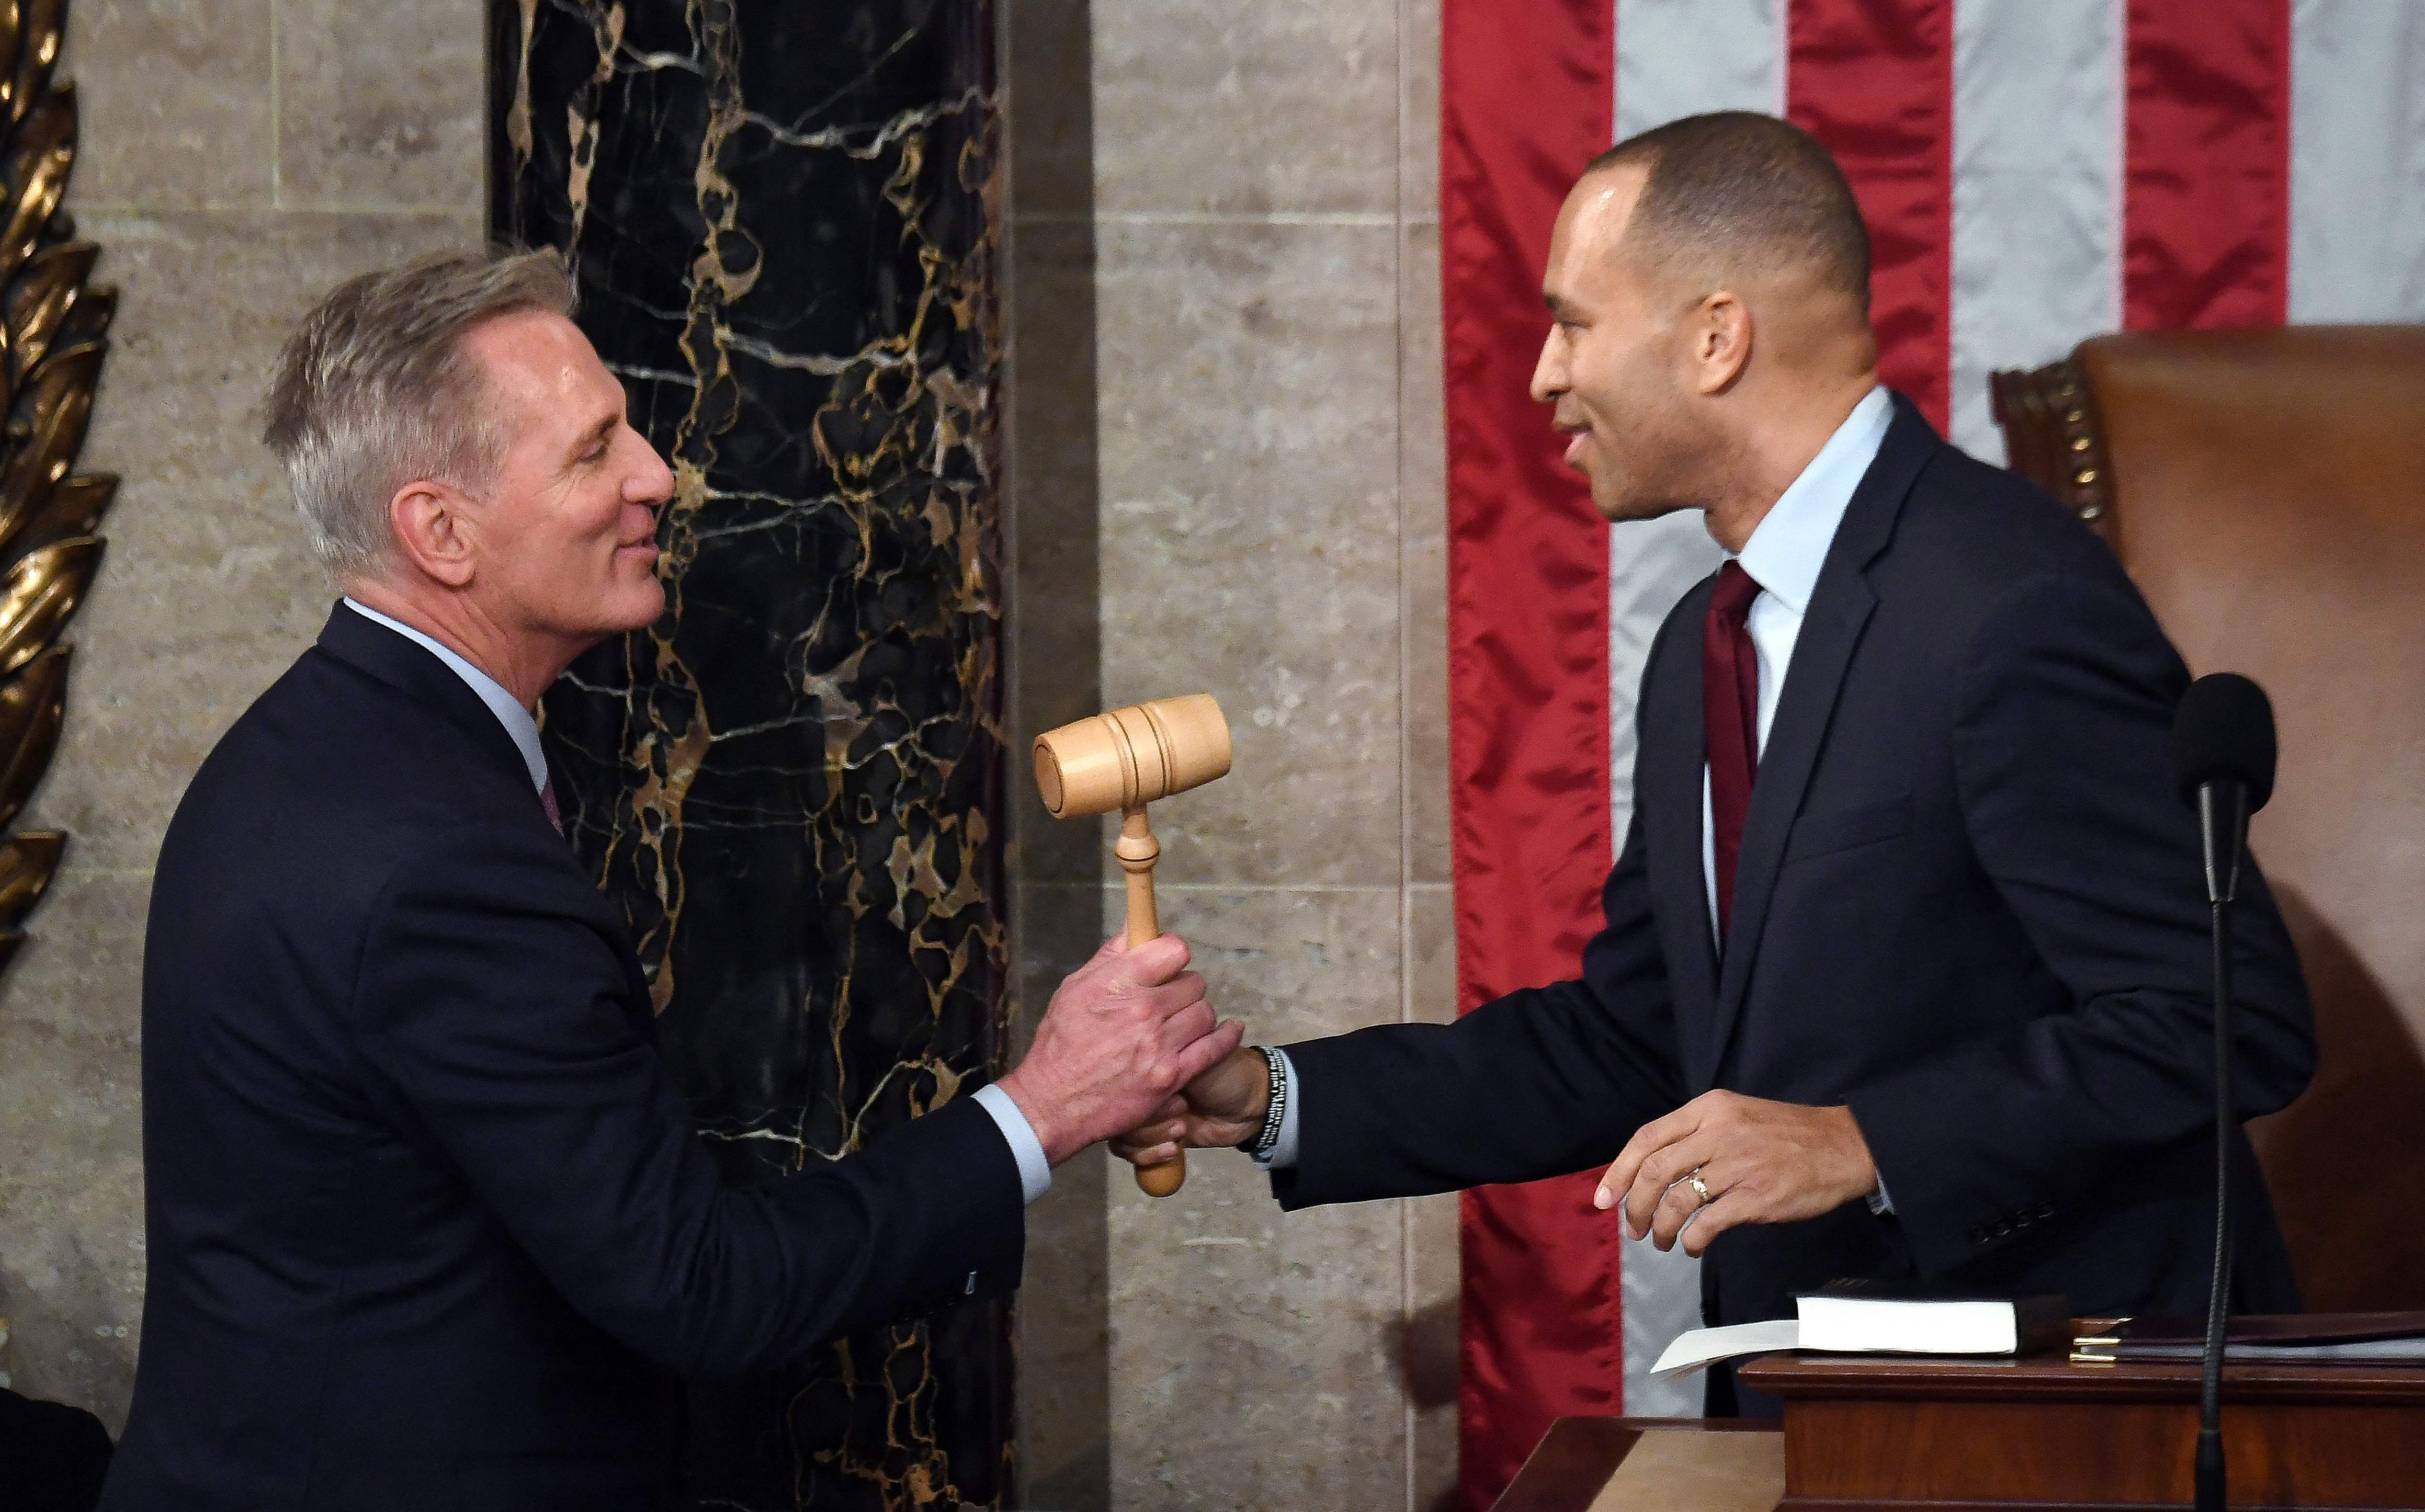 Minority leader Hakeem Jeffries gives the gavel to newly elected speaker of the US House of Representatives Kevin McCarthy after being annointed on the 15th round of voting at the US Capitol in Washington, DC, on 7 January 2023